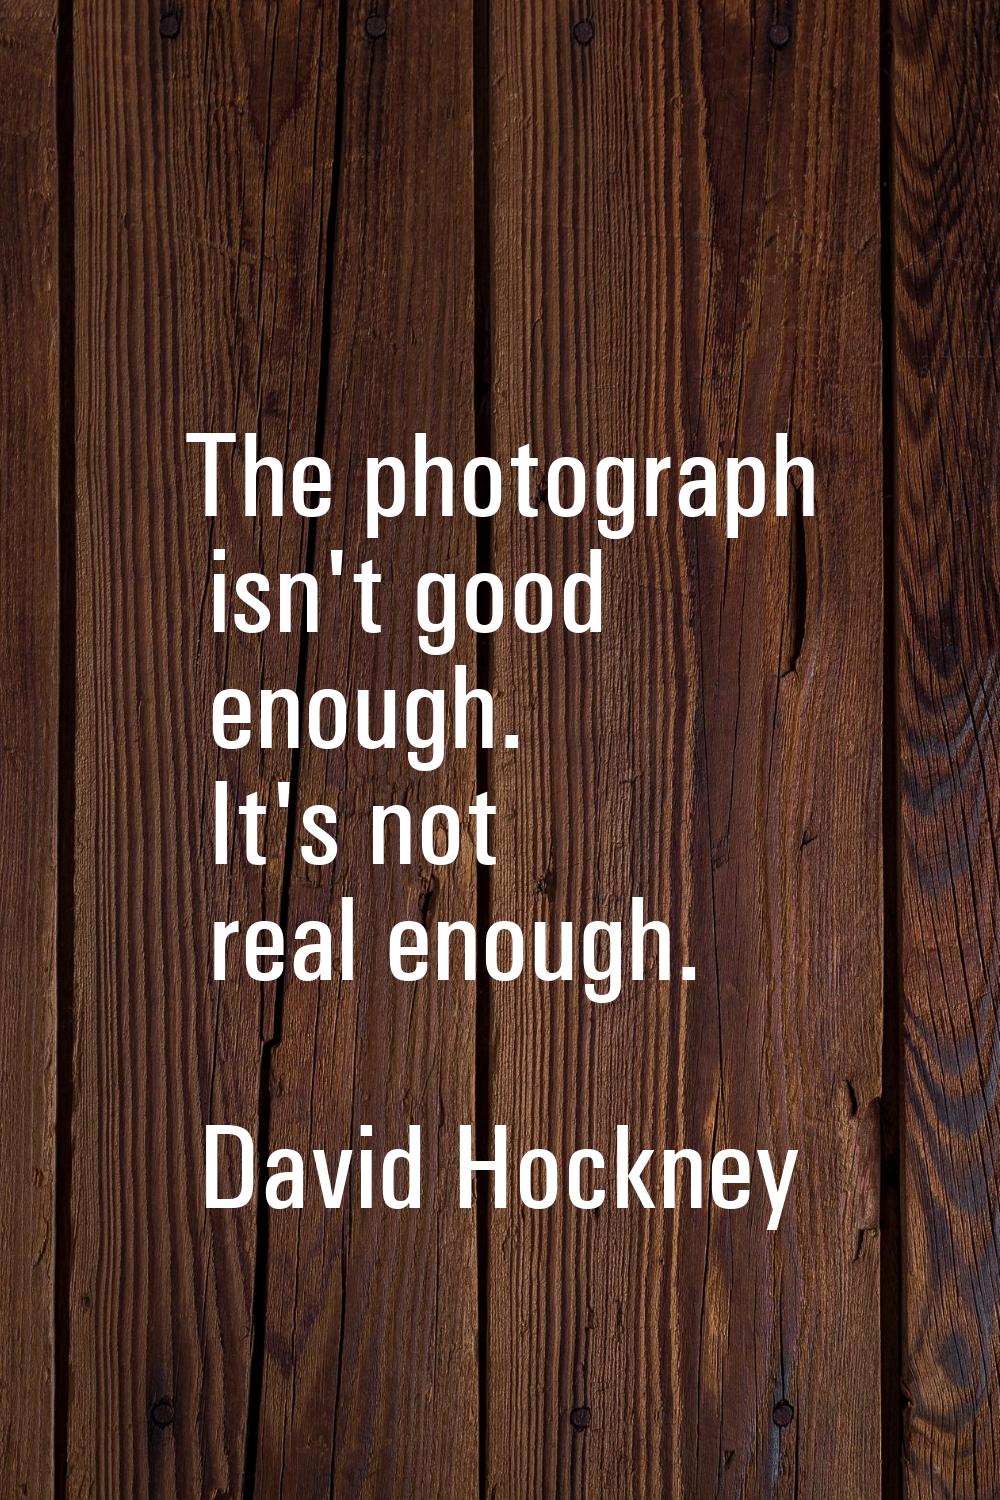 The photograph isn't good enough. It's not real enough.